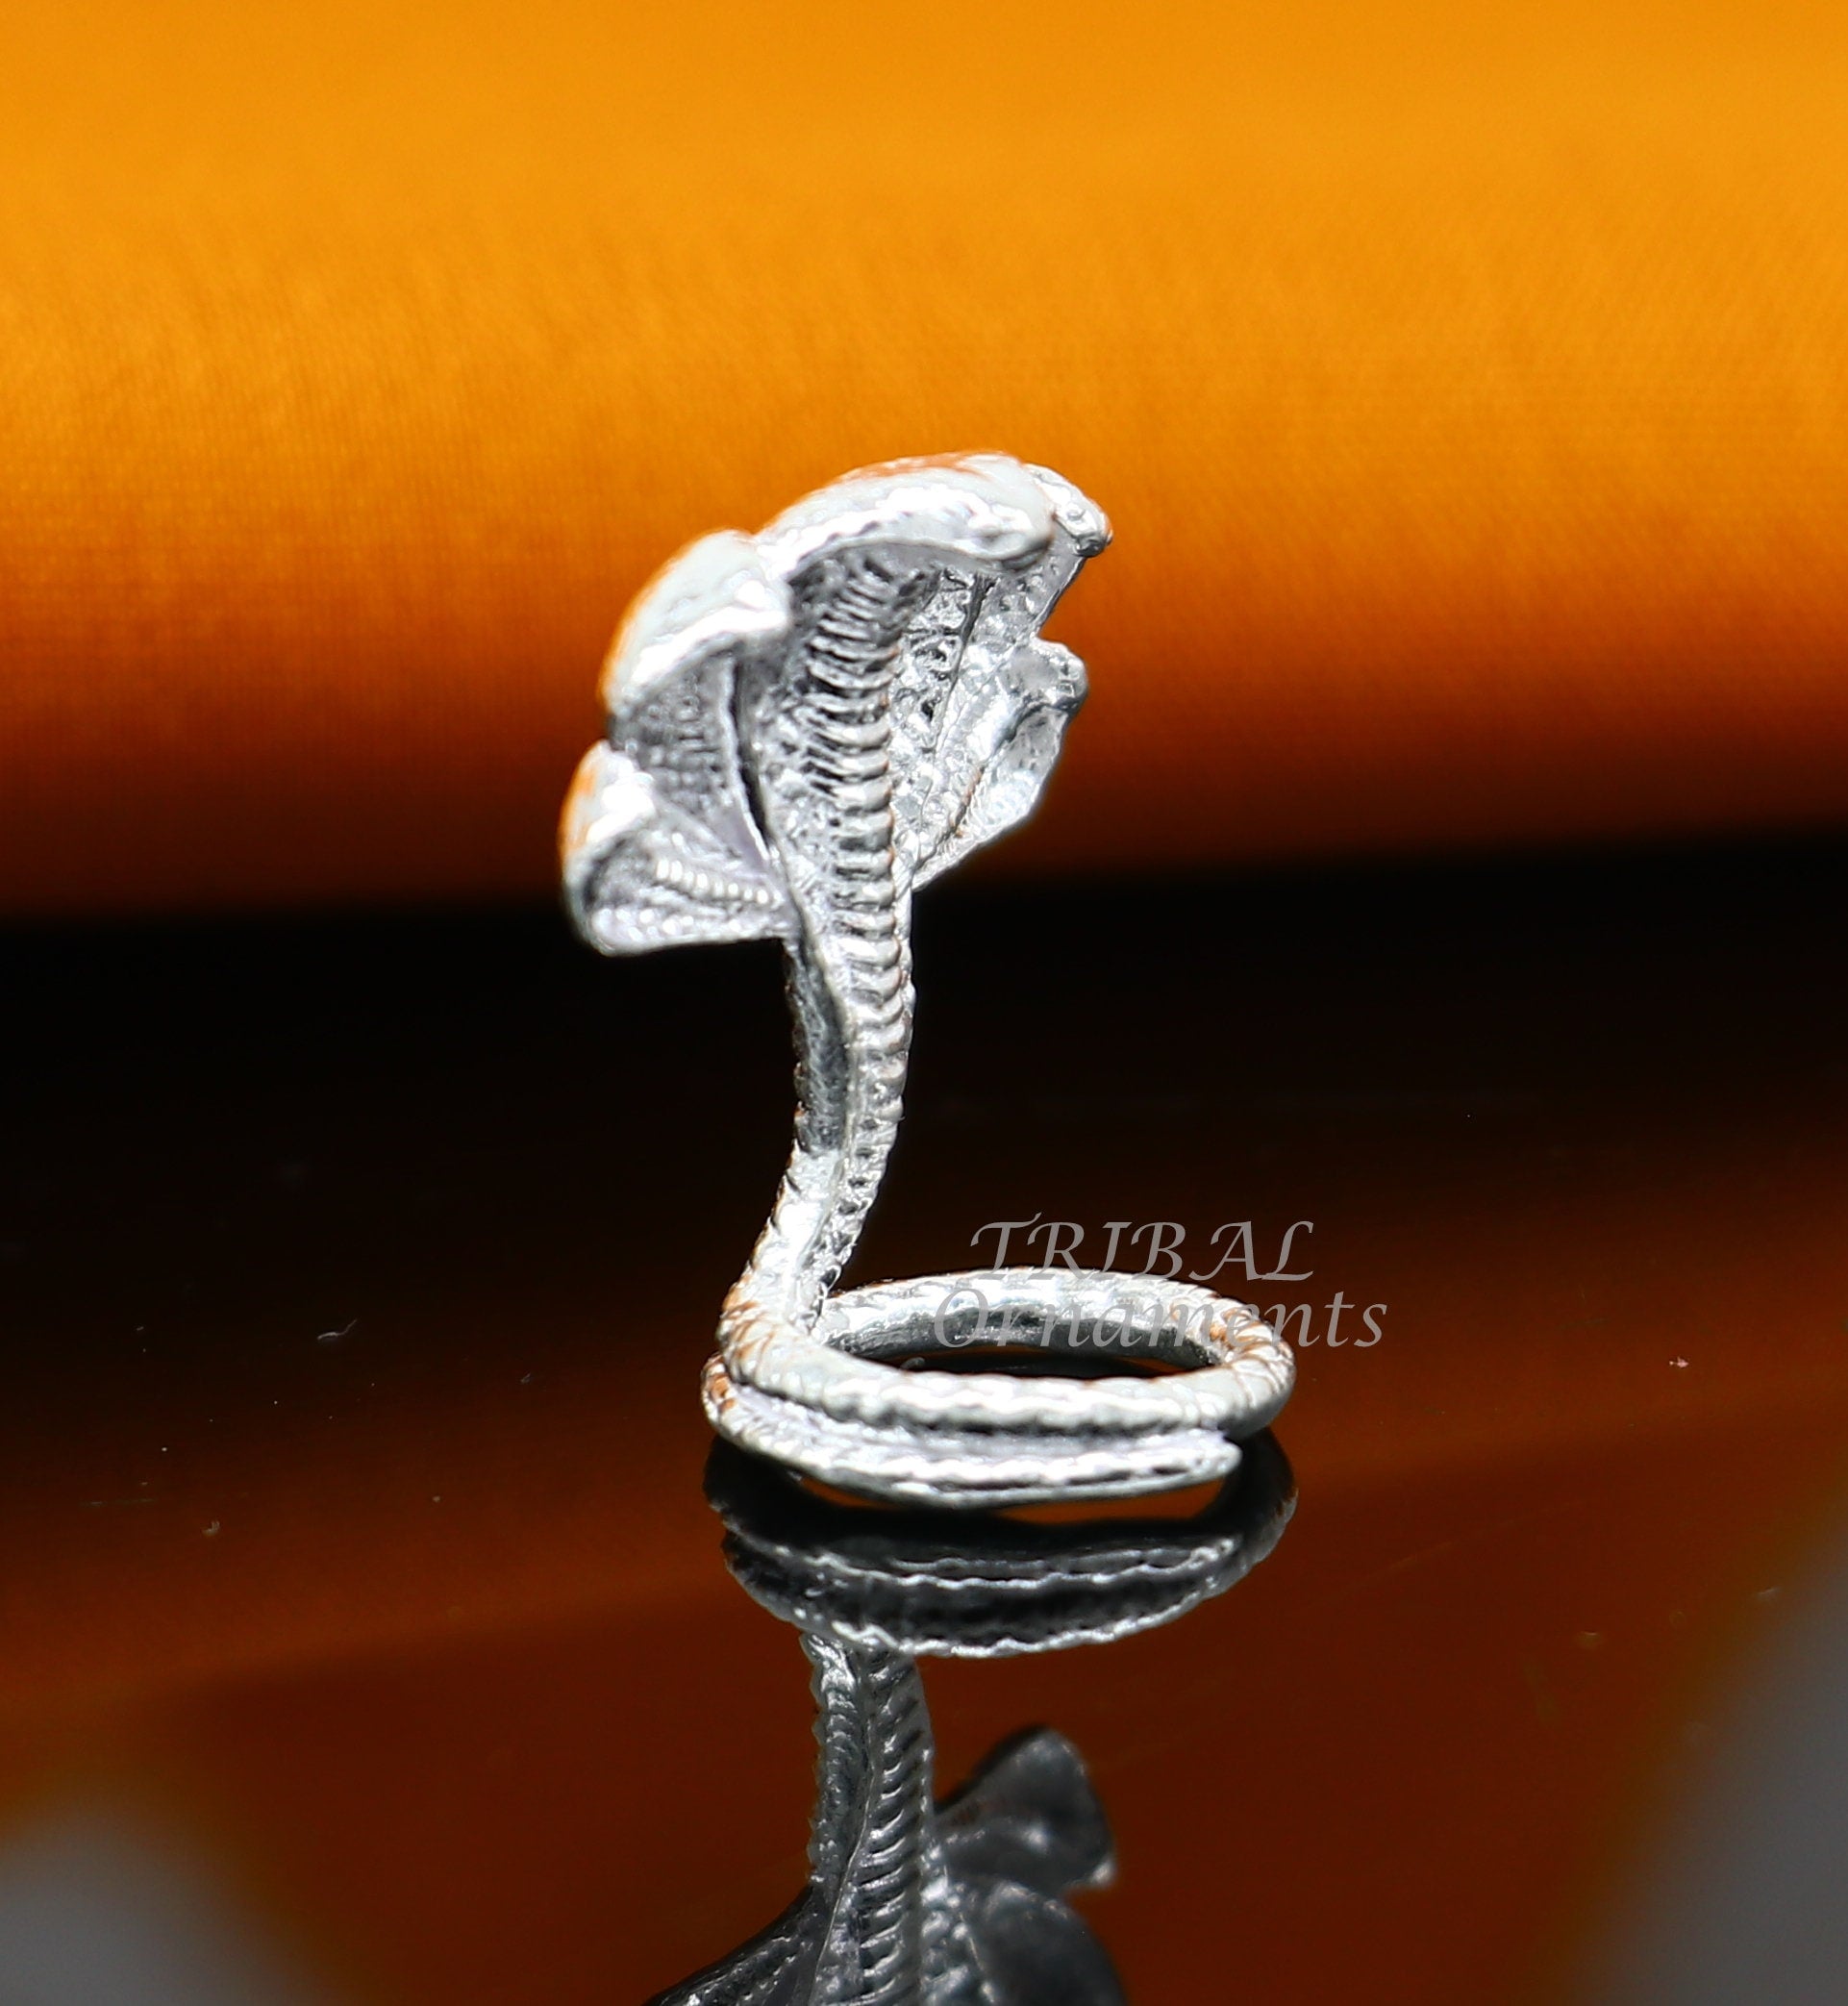 925 sterling silver solid divine panchmukhi Sheshnag, wonderful shiva snake amazing puja articles or utensils for home or temple SU1000 - TRIBAL ORNAMENTS